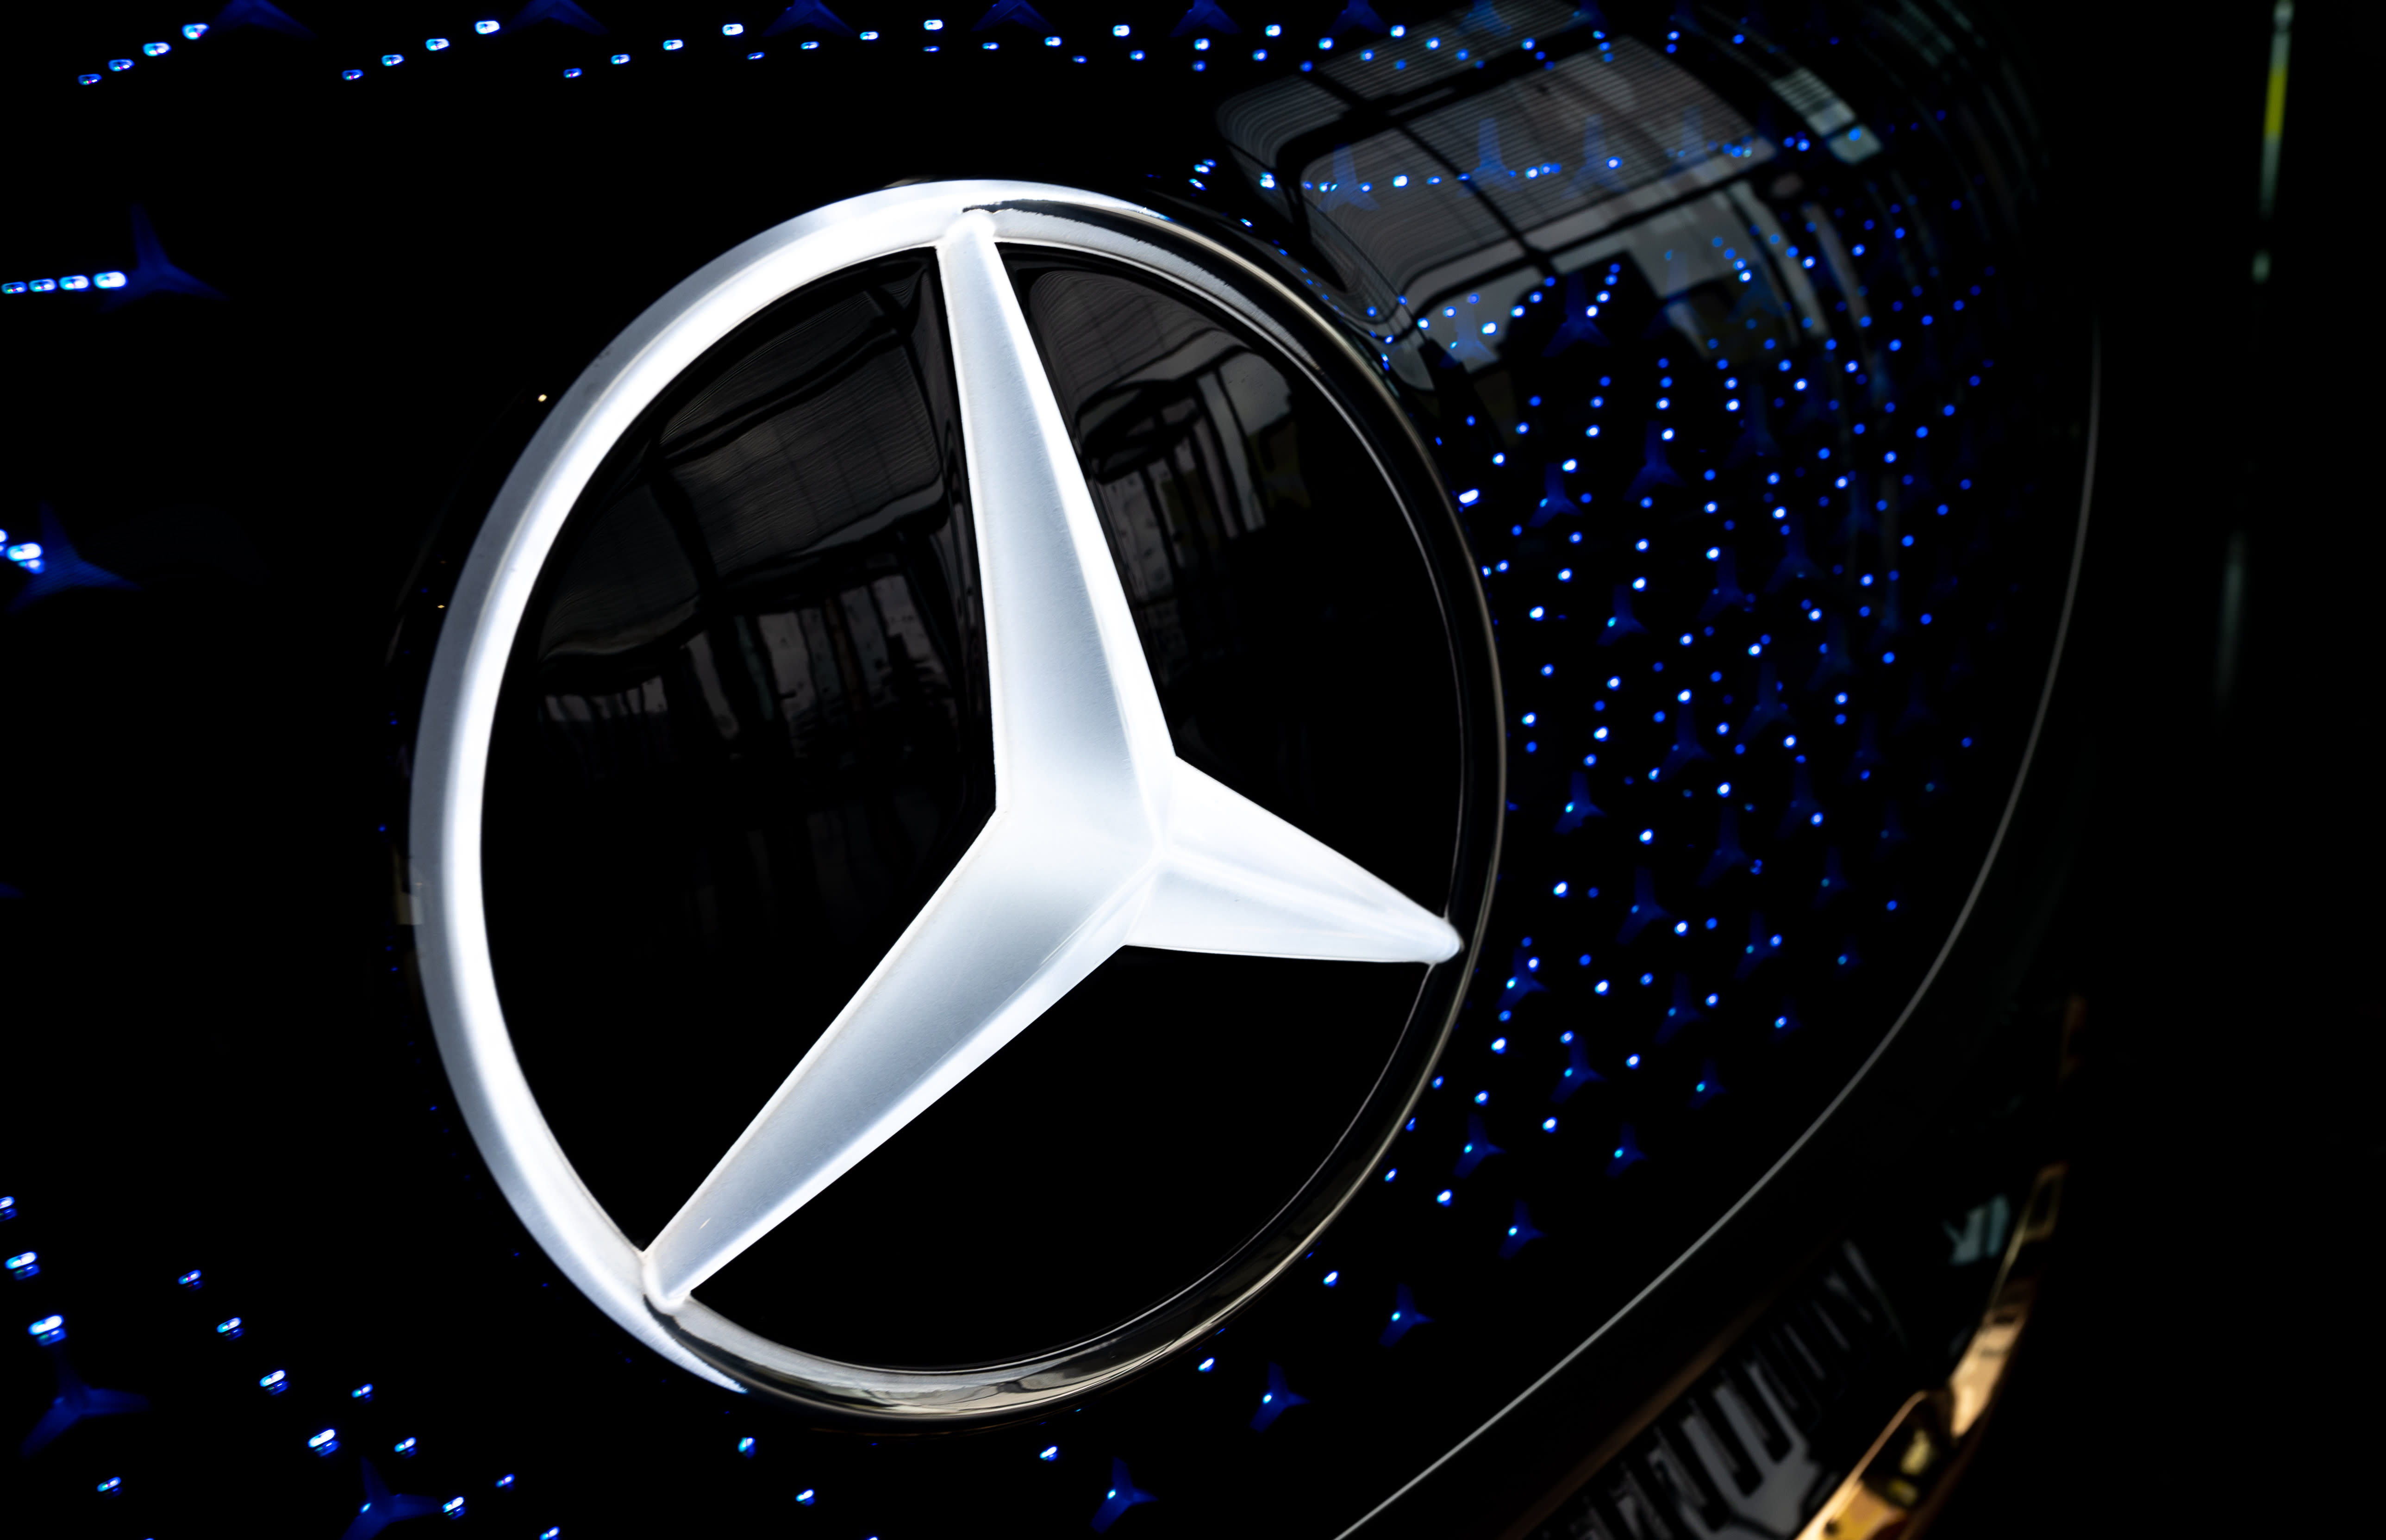 How Mercedes-Benz became so prestigious, and why it is challenged